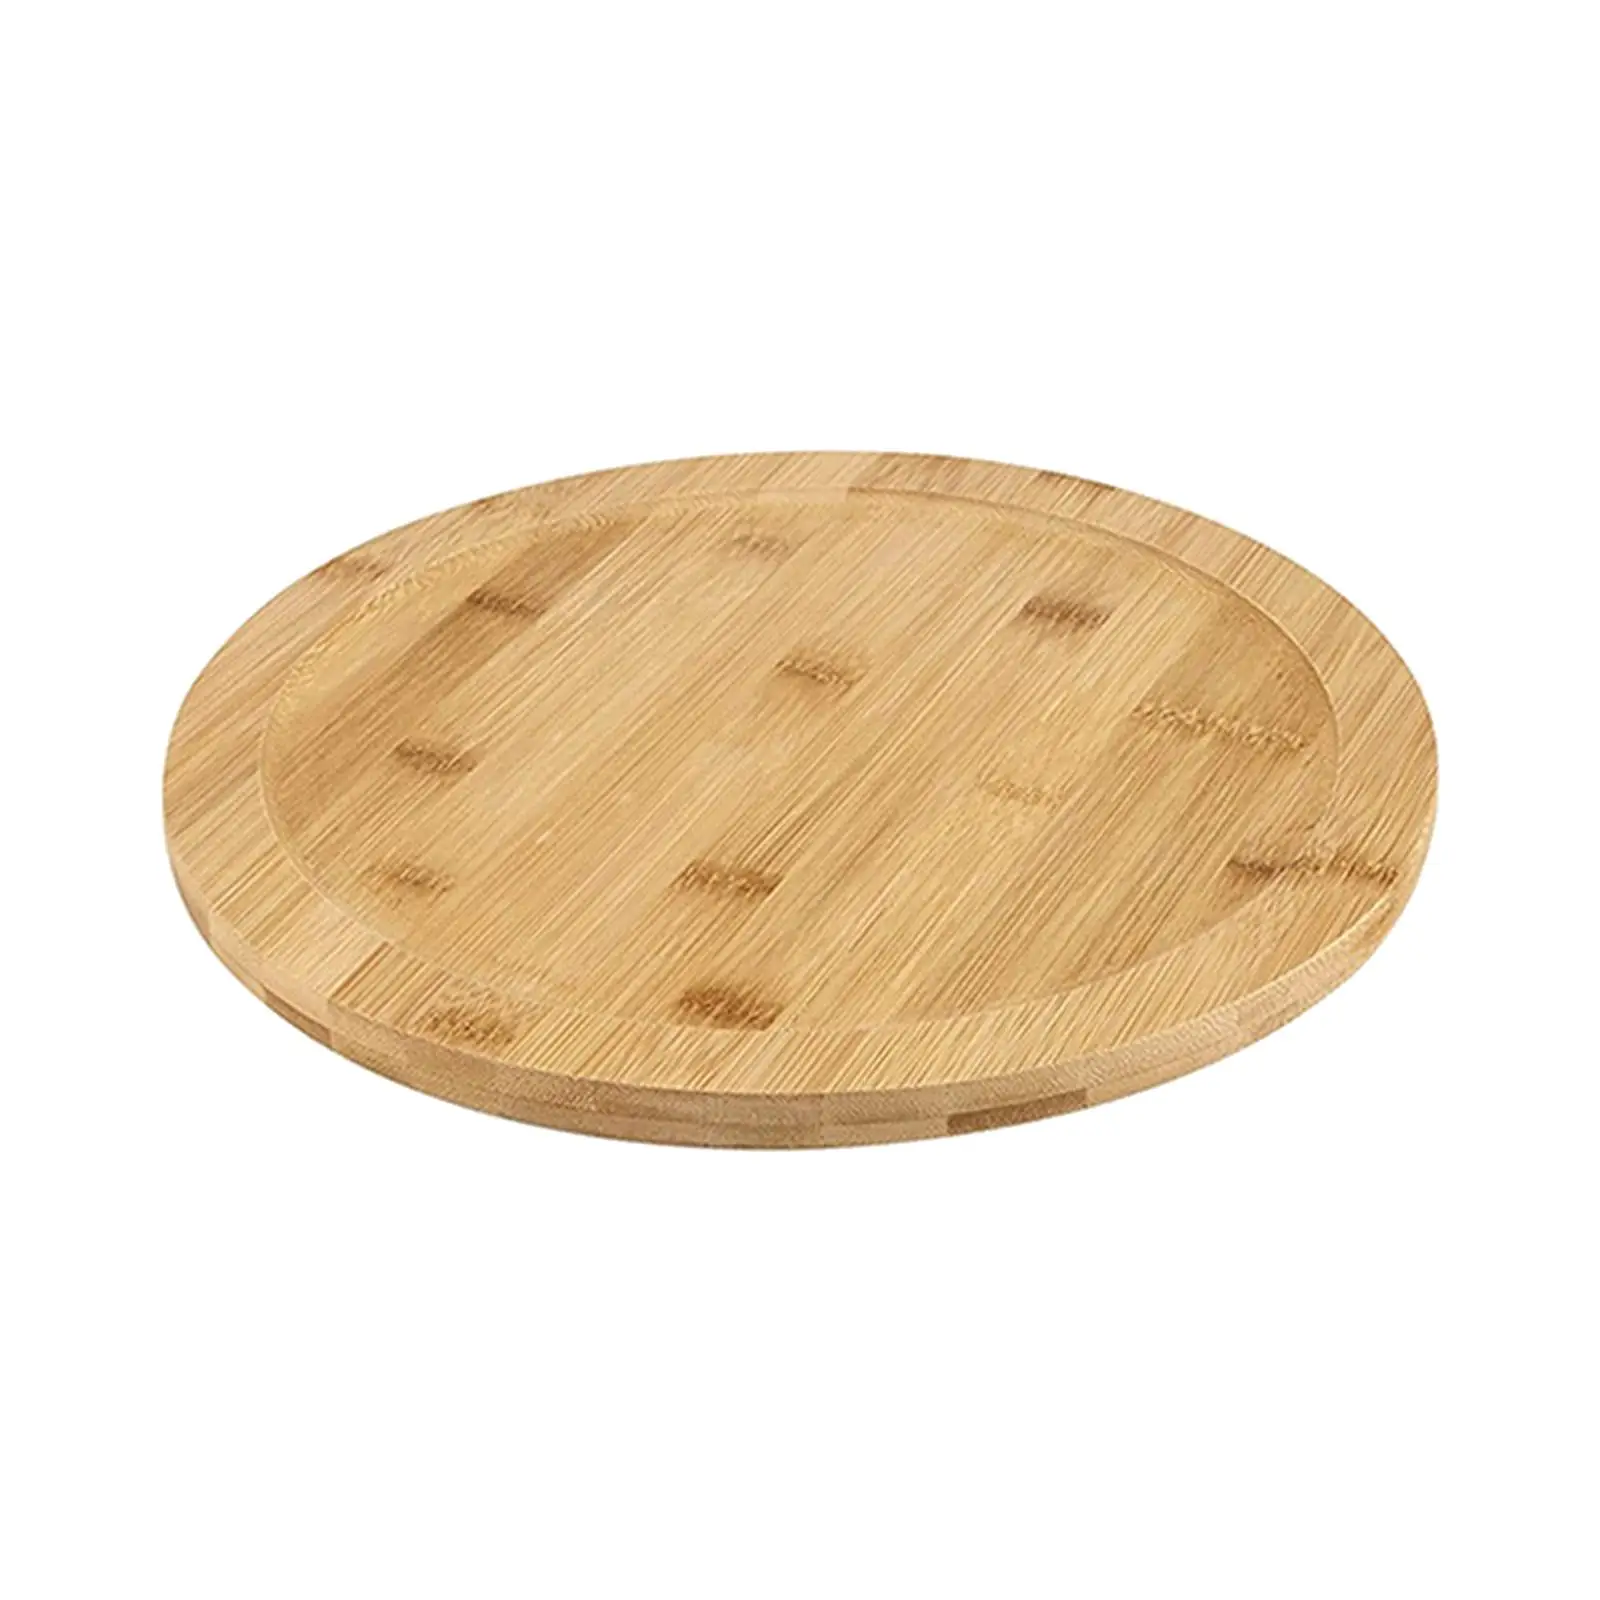 Wooden Round Rotating Plate Cake Stand Pizza Serving Board Rotating Wooden Tray for Dining Table Cabinet Pantry Kitchen Home